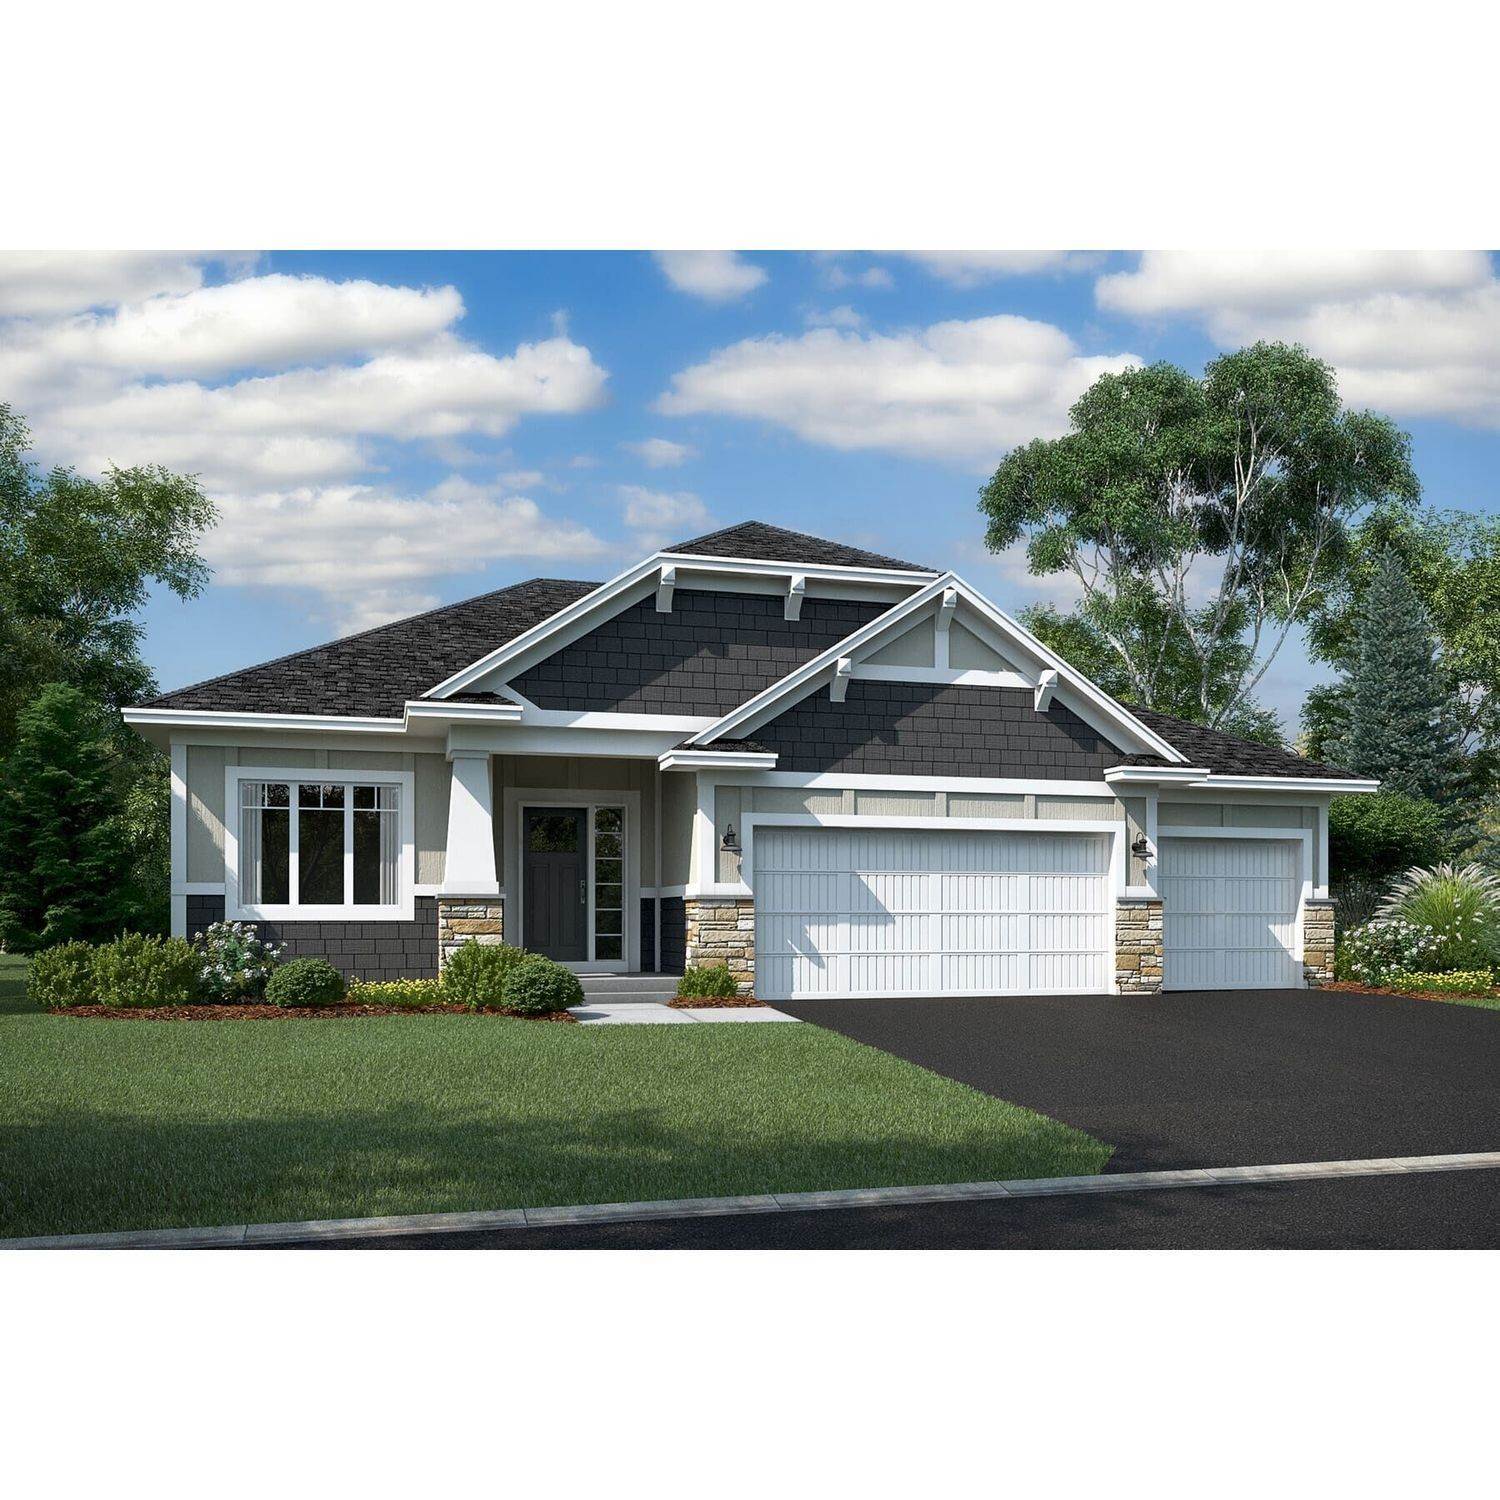 Single Family for Sale at Corcoran, MN 55340